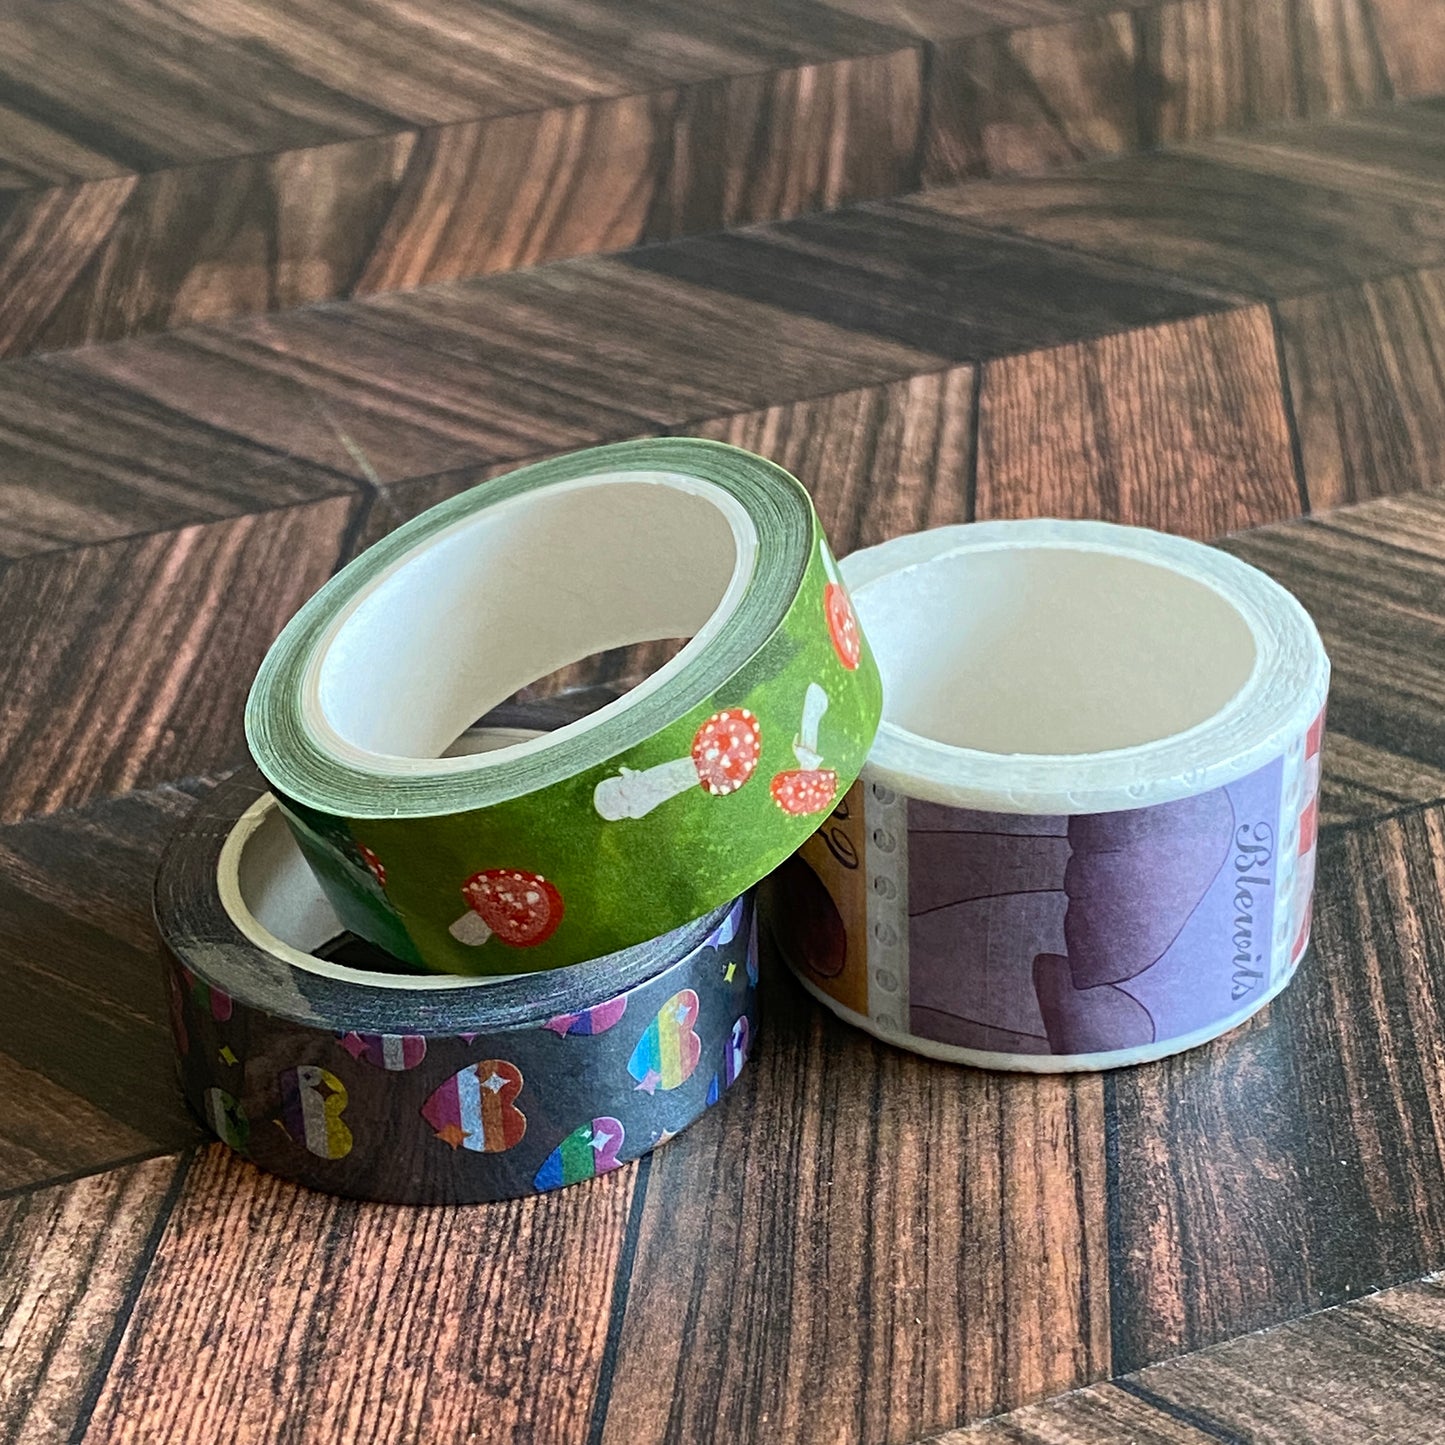 A different angle of all three washi tapes.